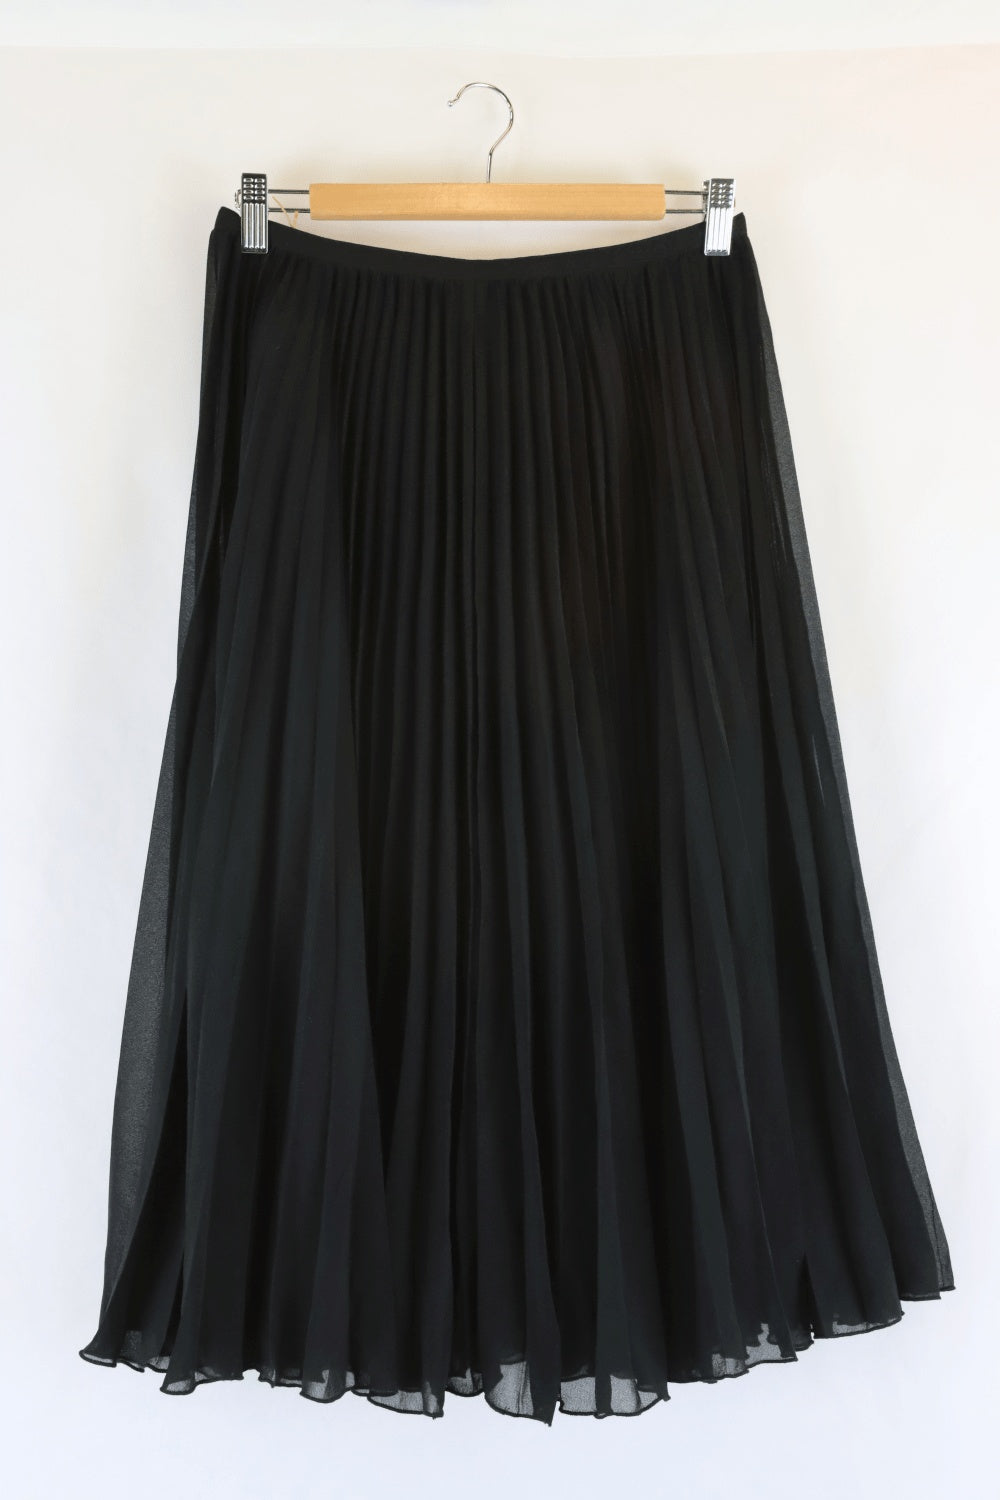 Country Road Black Pleated Skirt 4